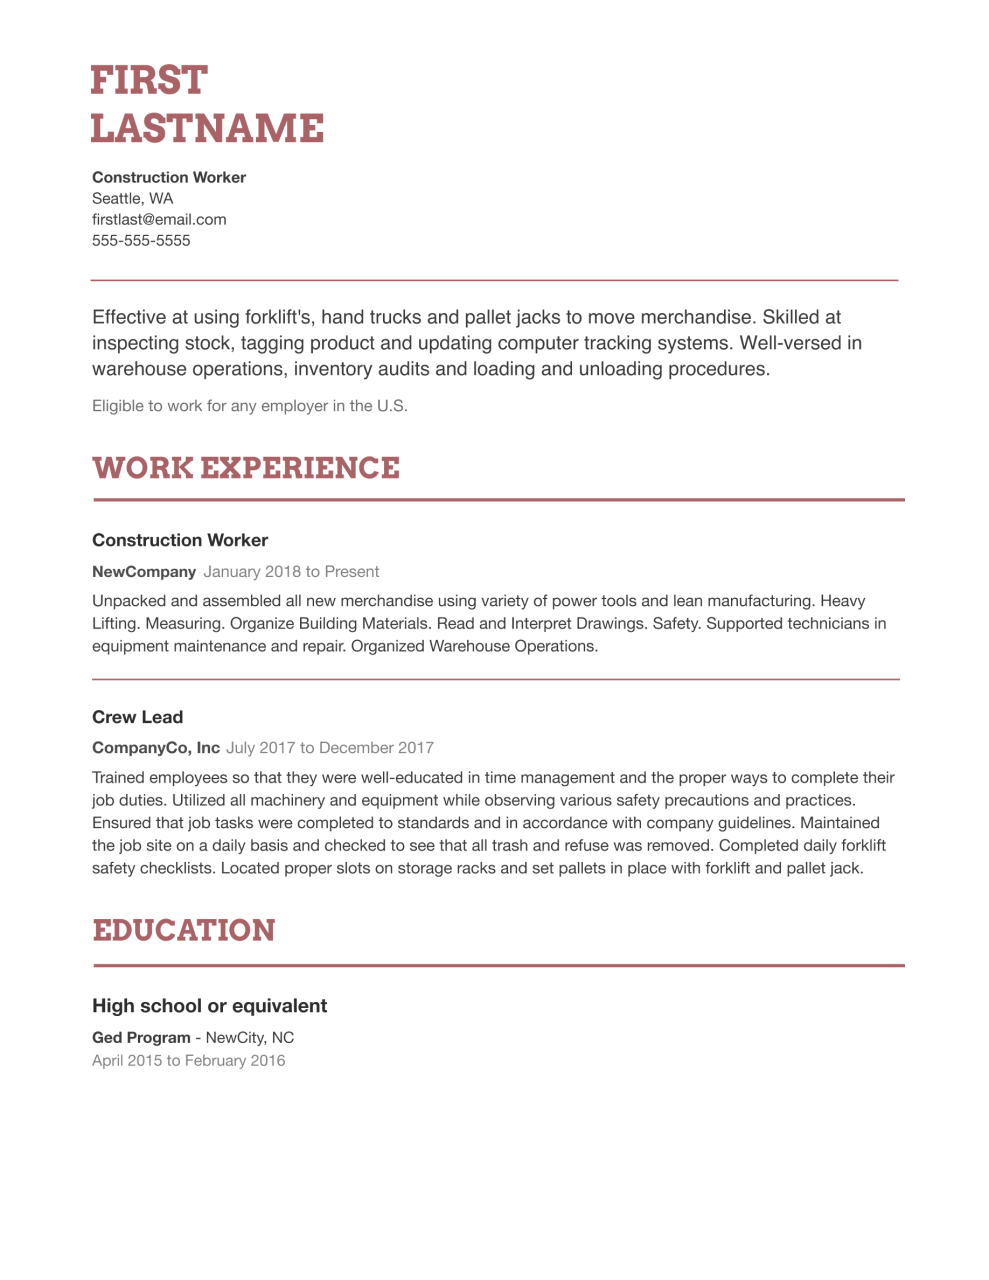 What To Write In The Skills And Abilities Section Of A Resume